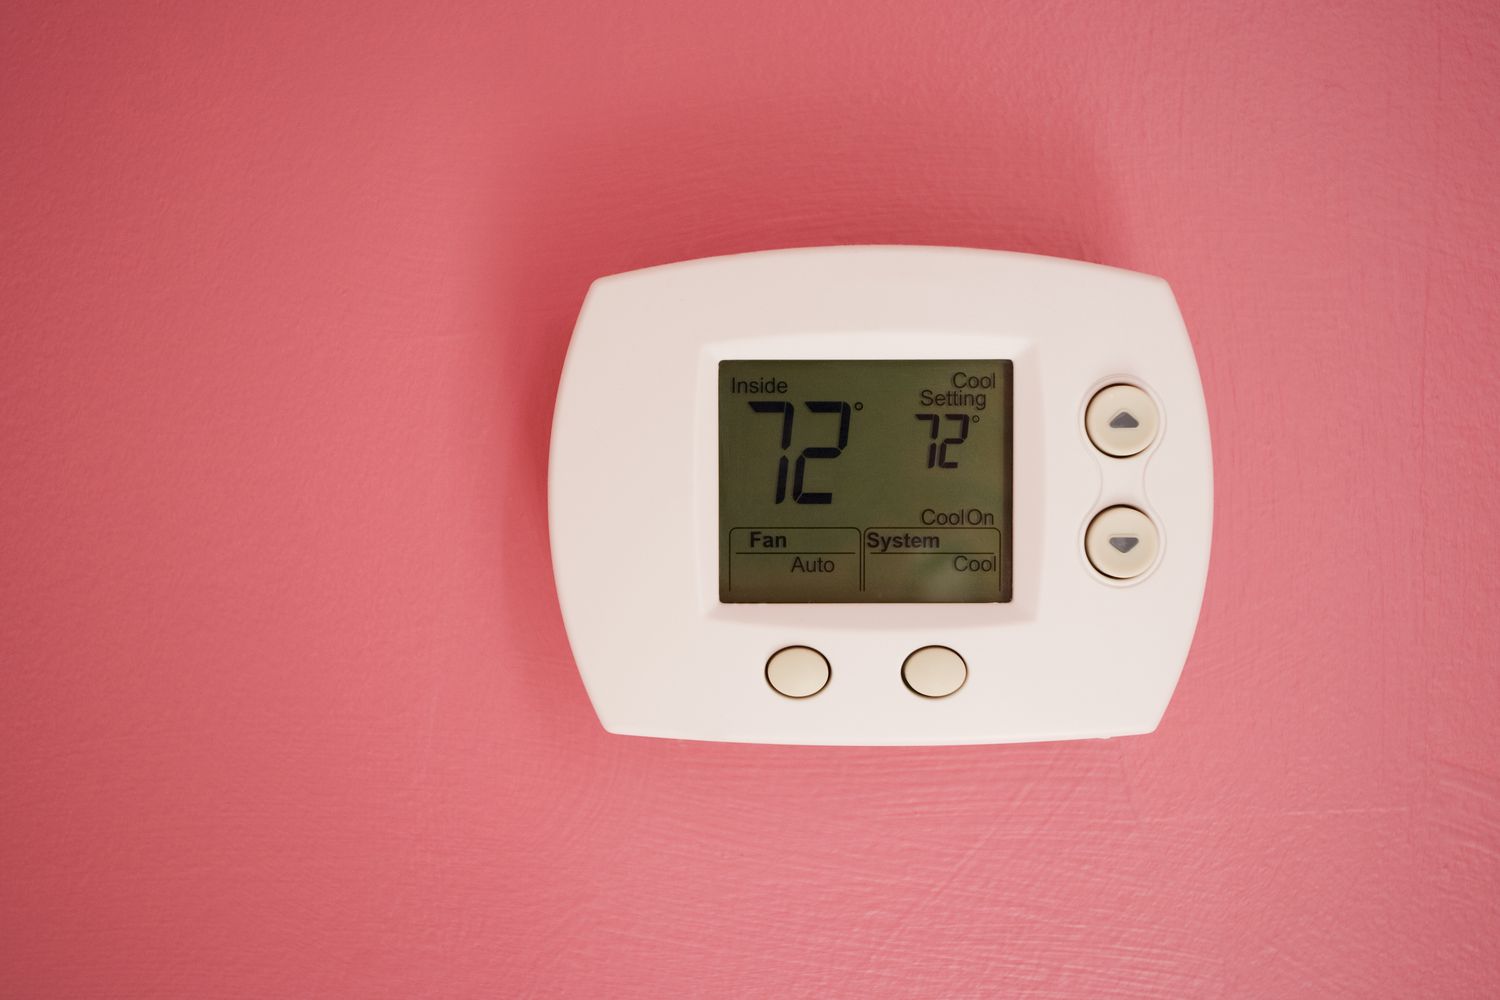 How Does The Thermostat Know The Temperature